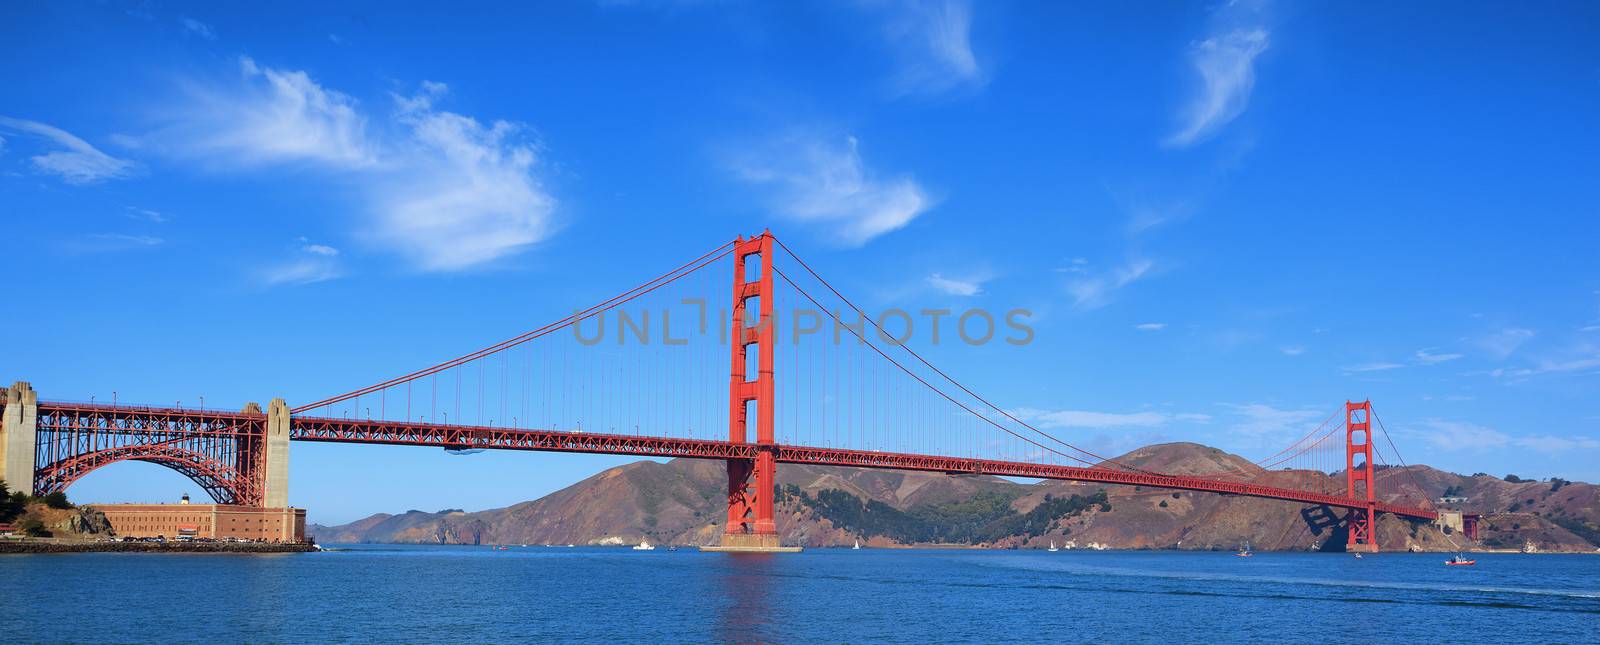 panoramic view of famous Golden Gate bridge by vwalakte